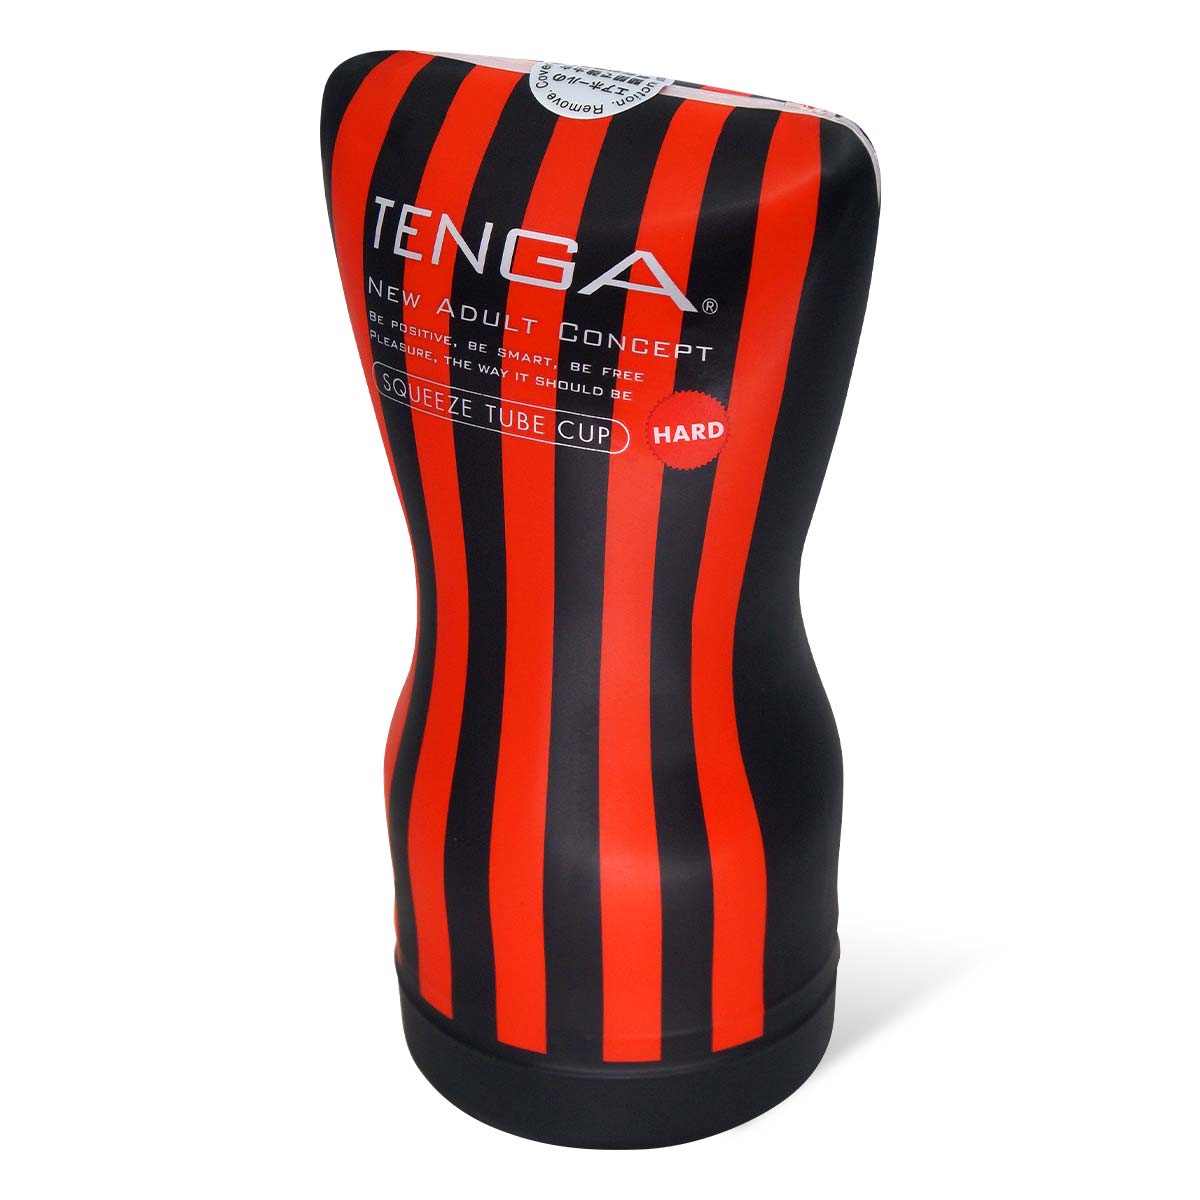 TENGA SQUEEZE TUBE CUP 2nd Generation HARD-p_1